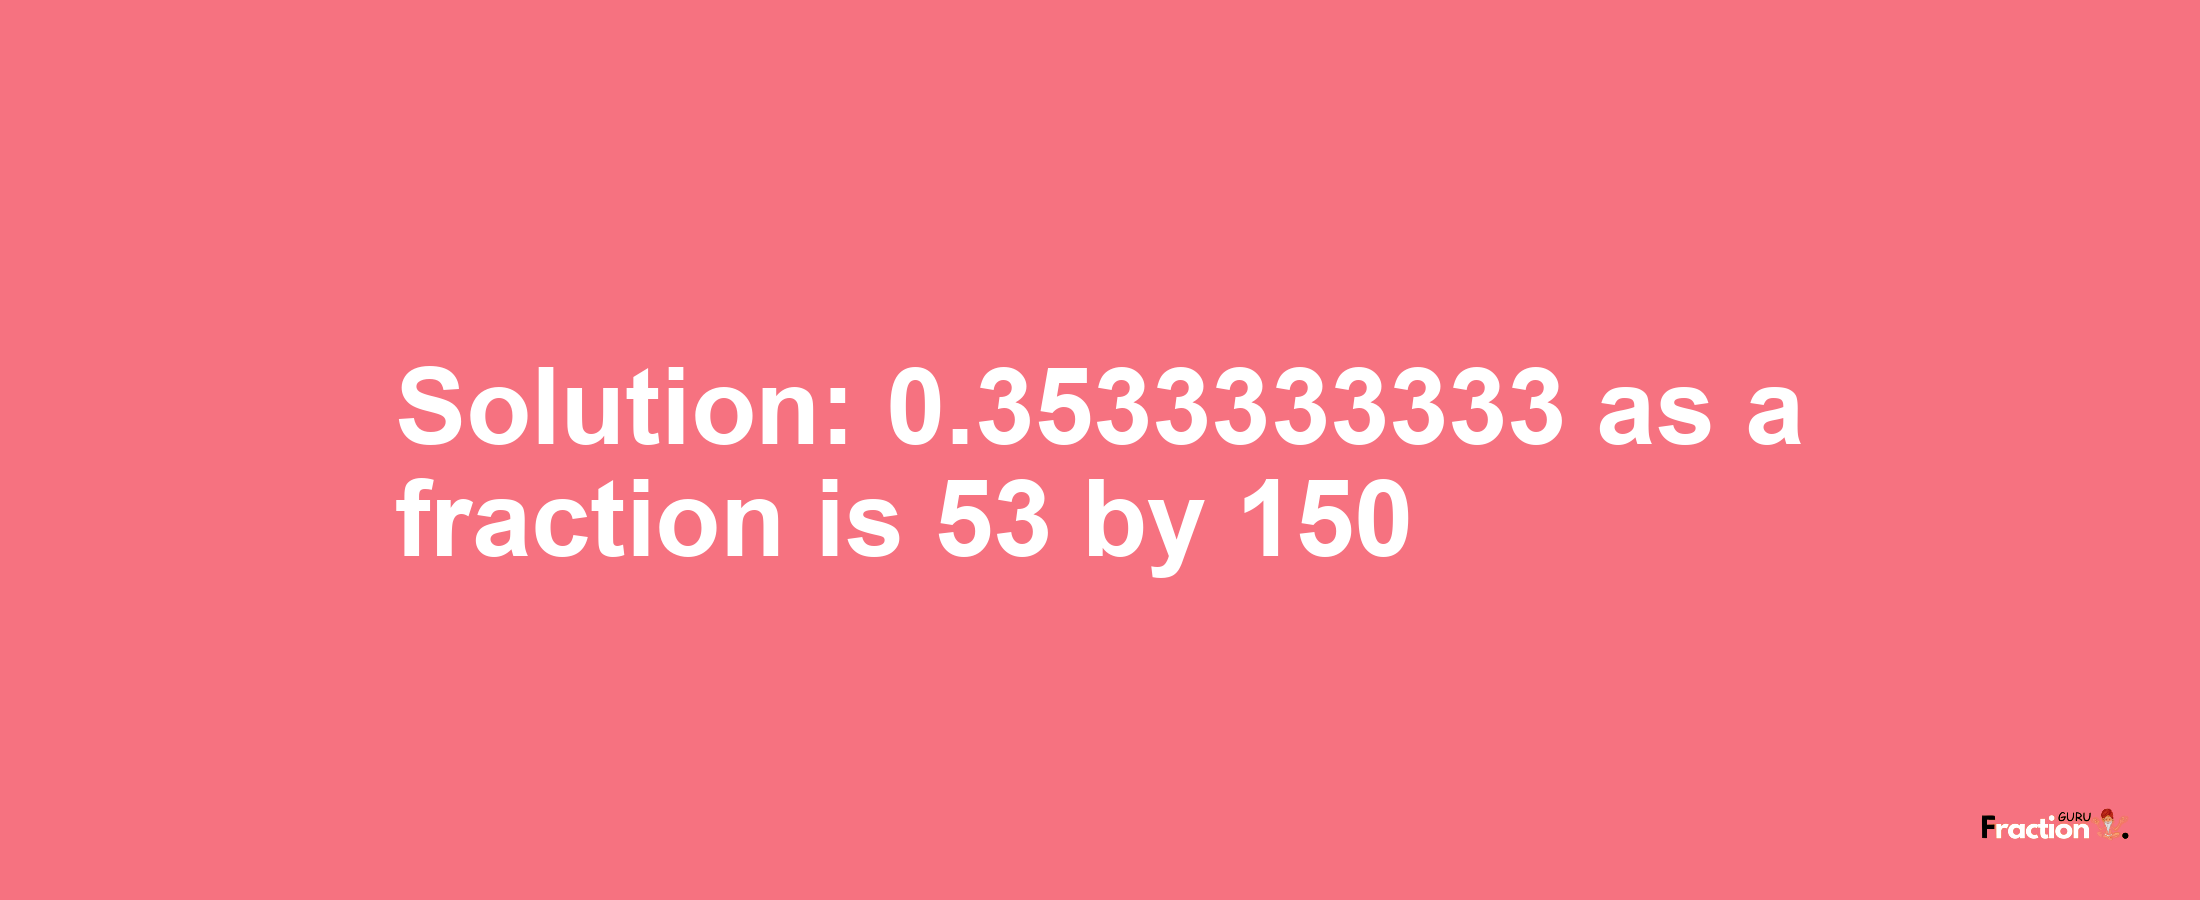 Solution:0.3533333333 as a fraction is 53/150